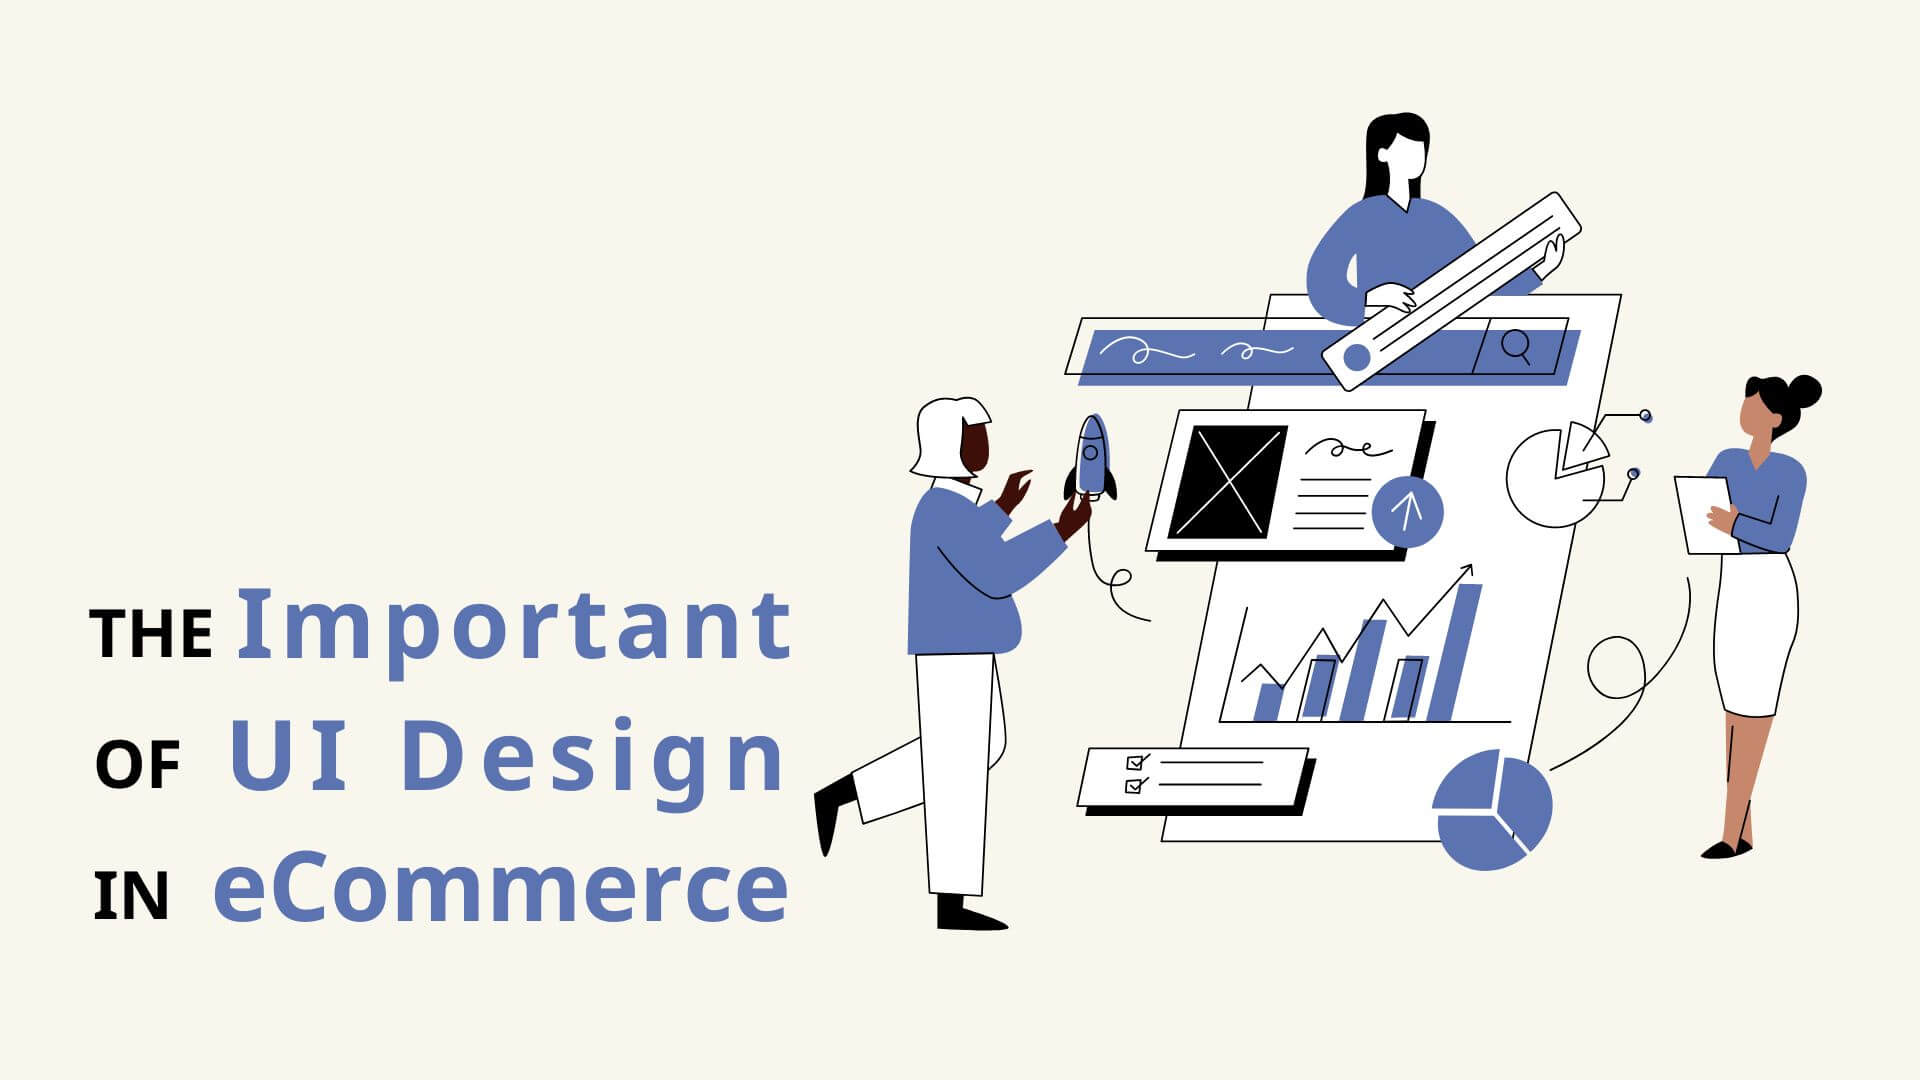 The Importance of UI Design in eCommerce